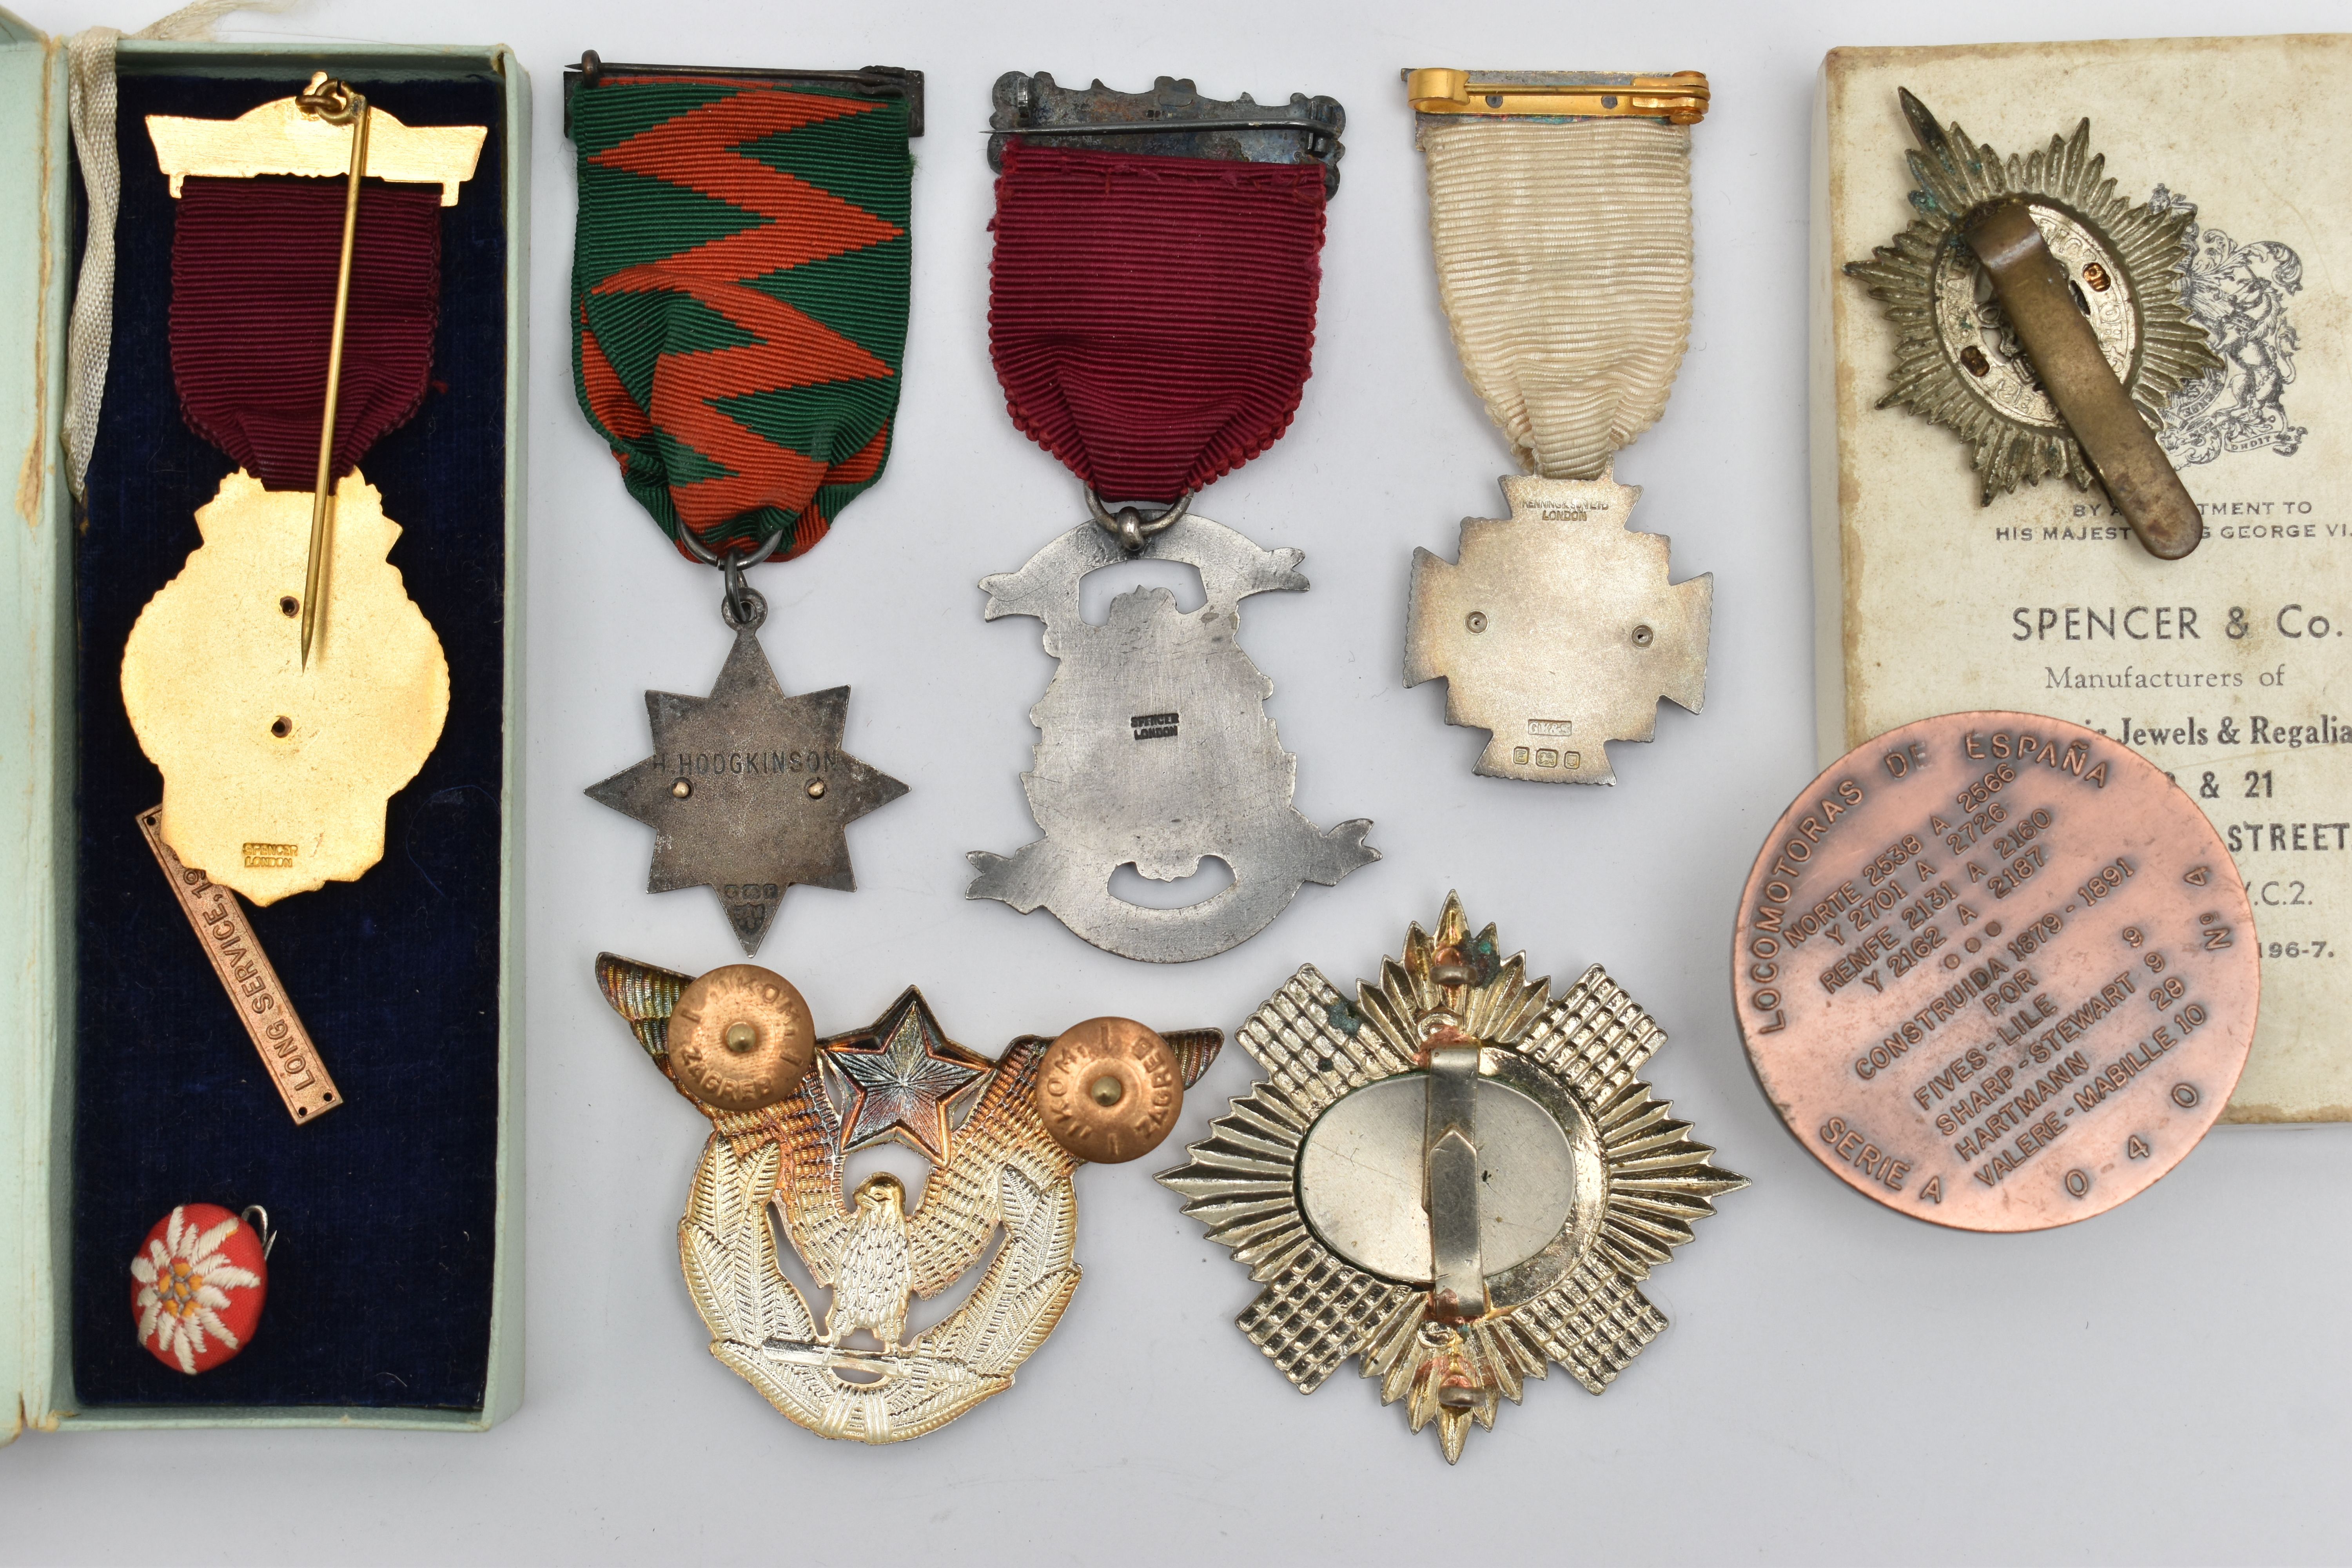 ASSSORTED MEDALS AND A MEDALLION, various medals including Masonic, The Royal Scots, etc some with - Image 4 of 6